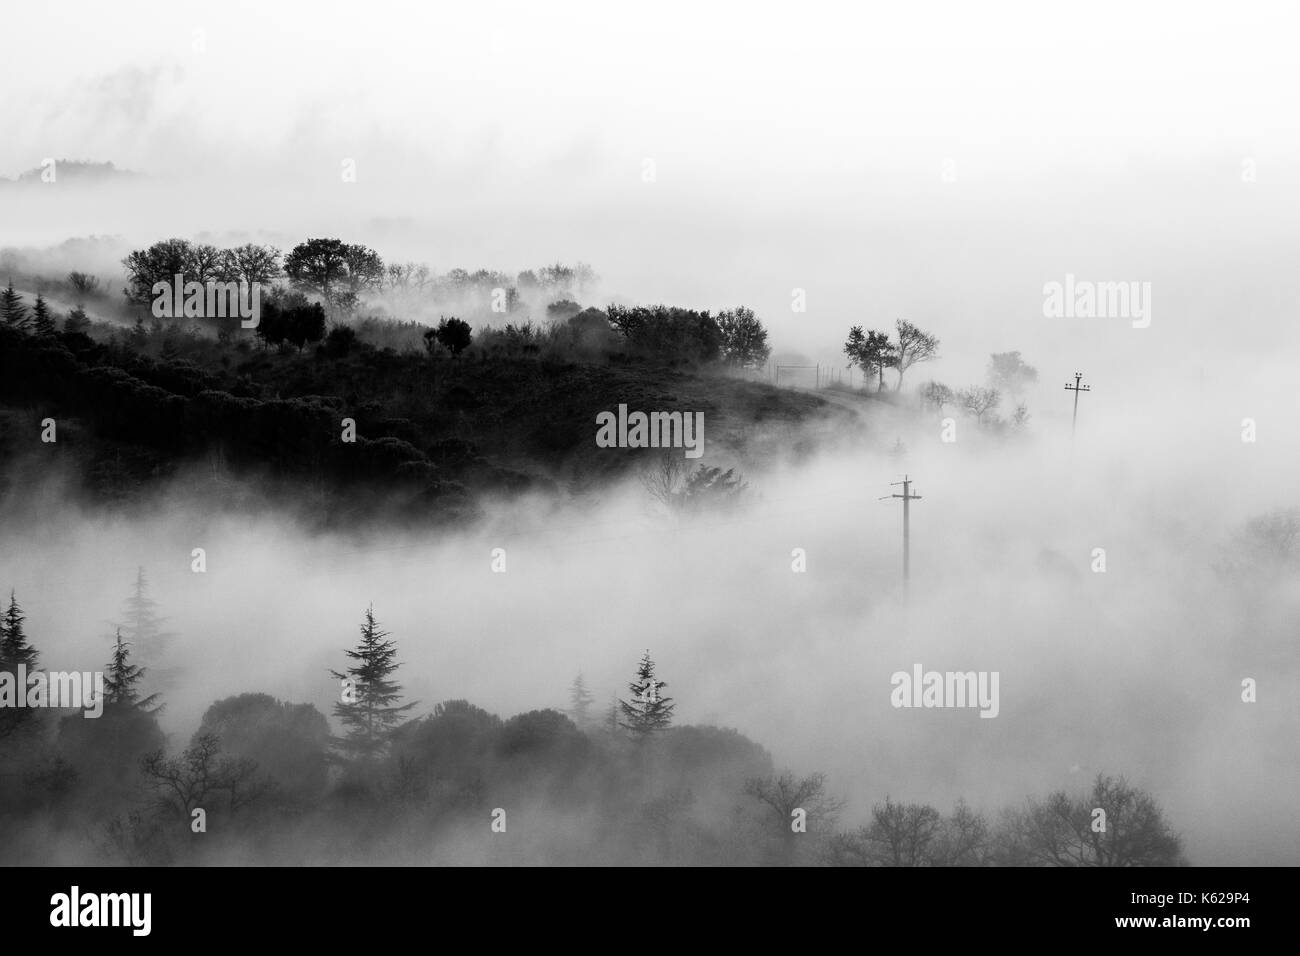 Fog filling up a valley, with emerging trees, hills and power lines Stock Photo